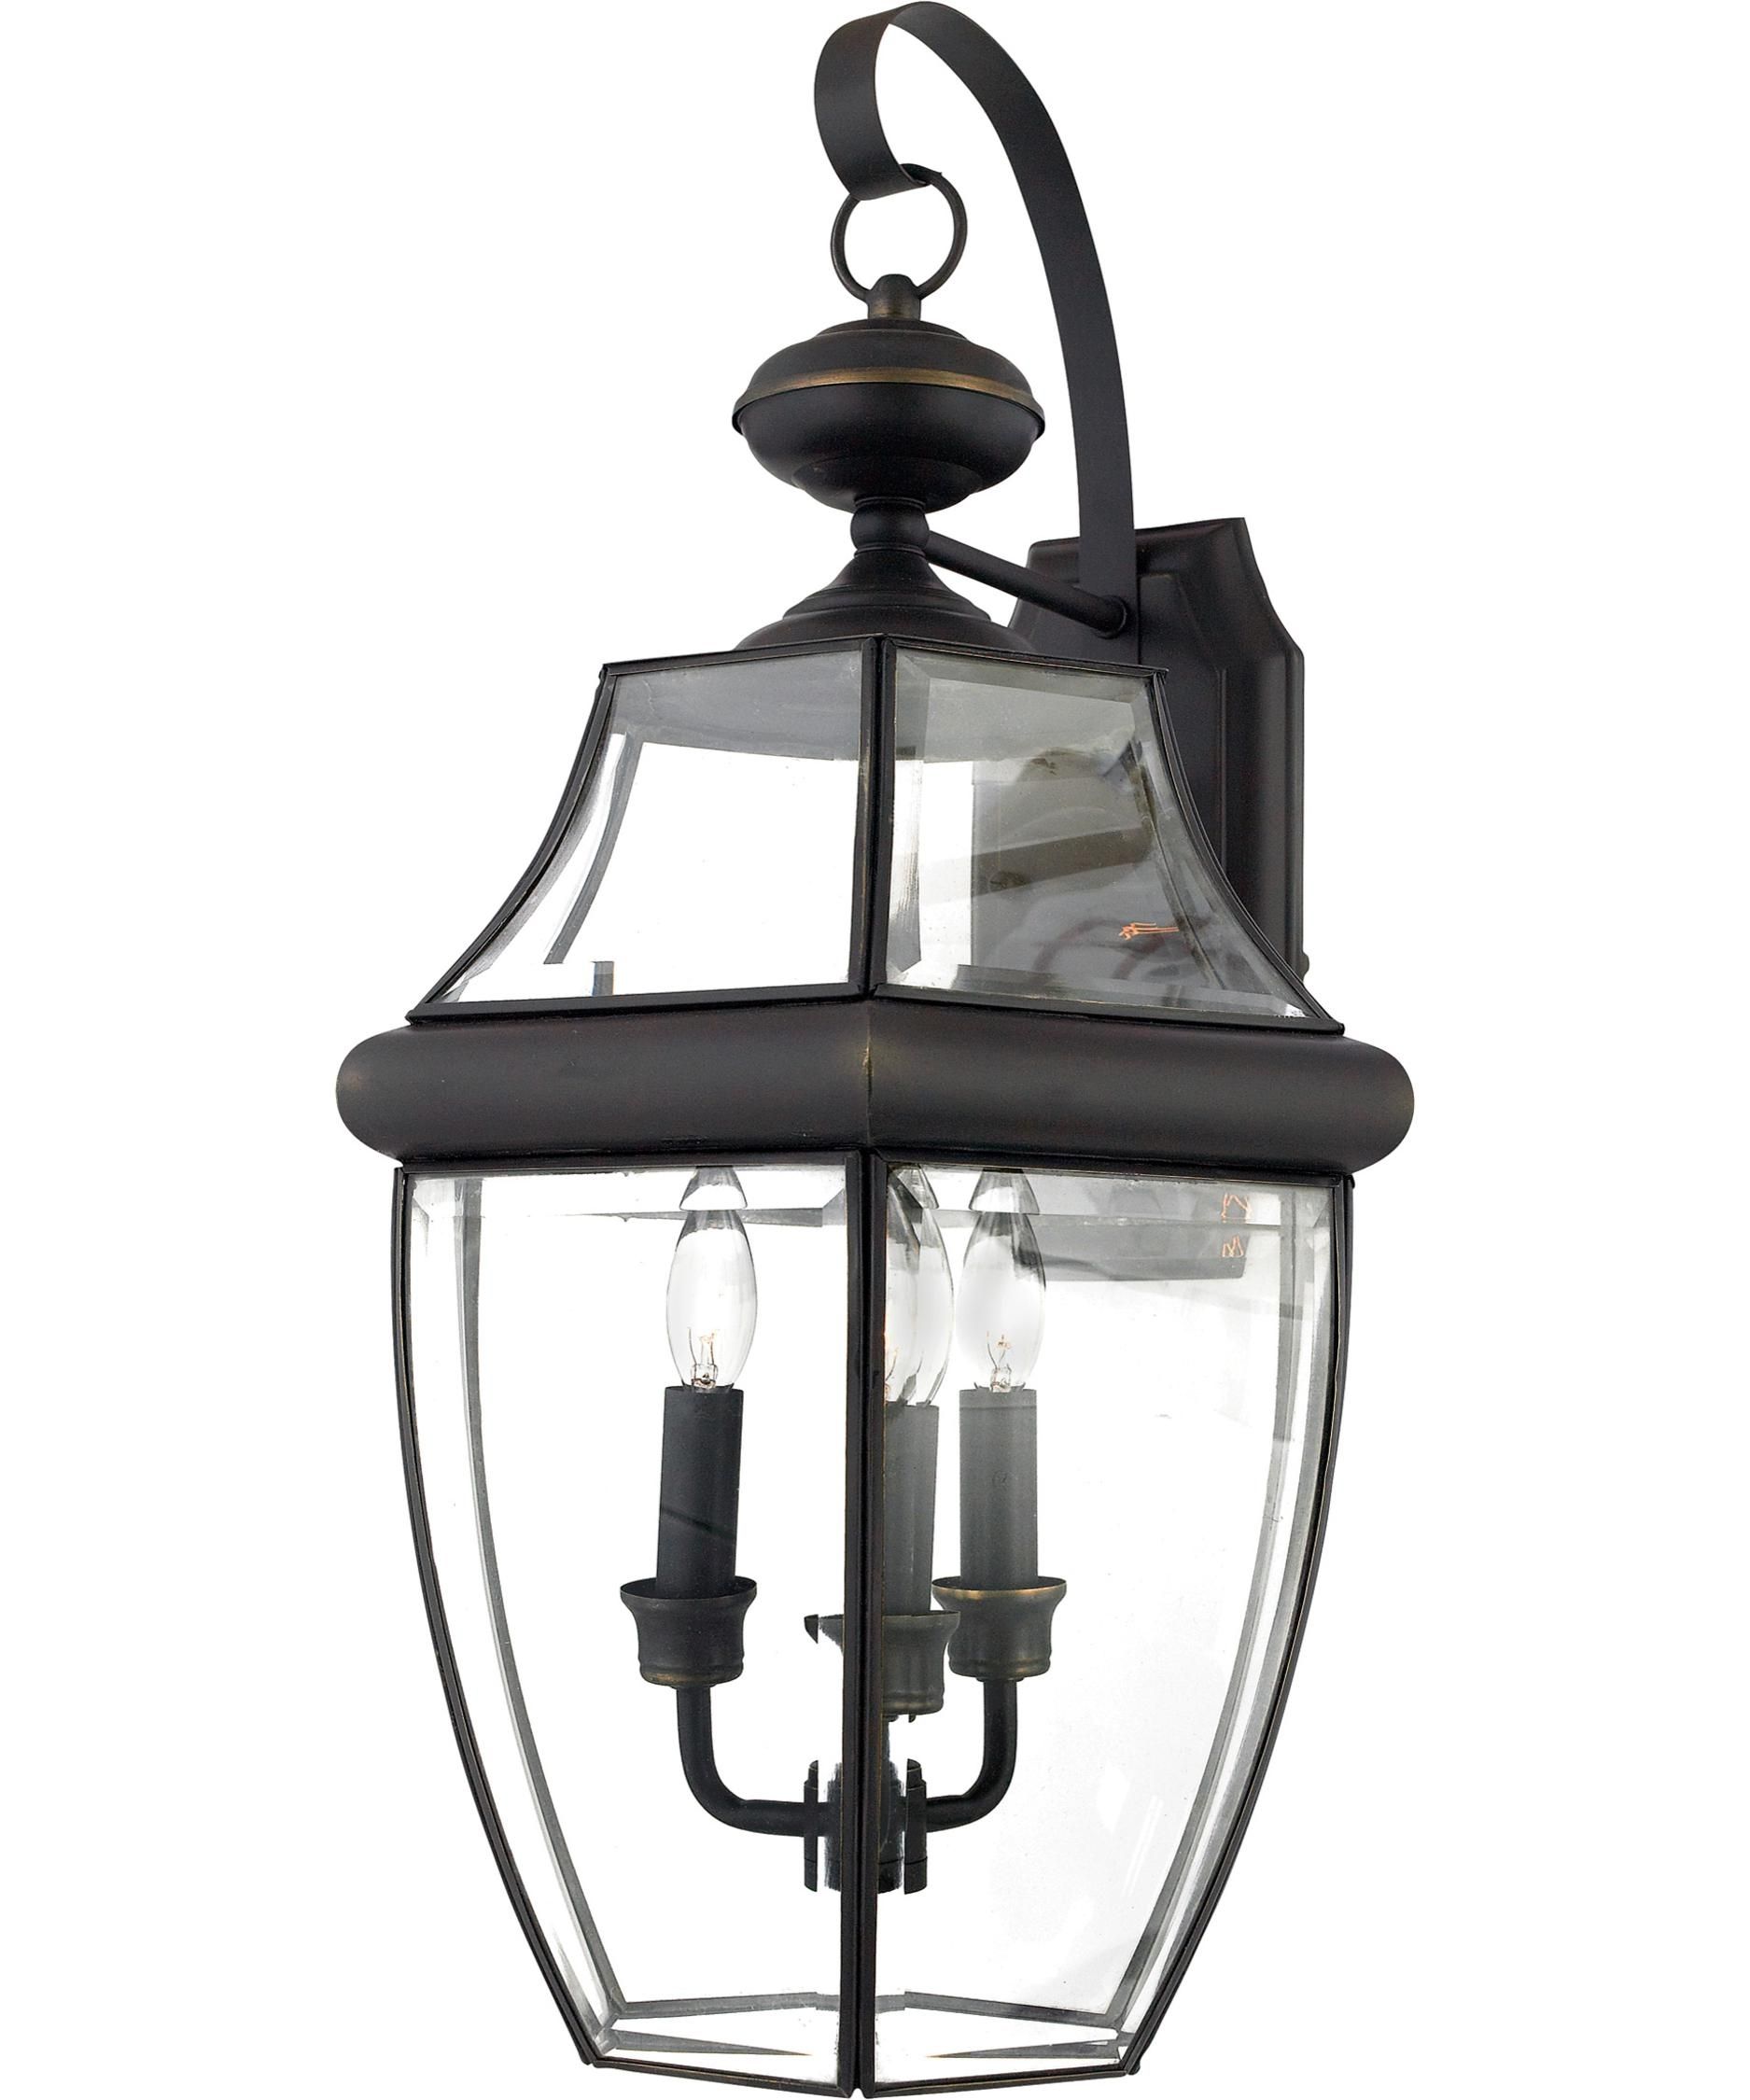 Quoizel Ny8318 Newbury 13 Inch Wide 3 Light Outdoor Wall Light In Quoizel Outdoor Wall Lighting (View 9 of 15)